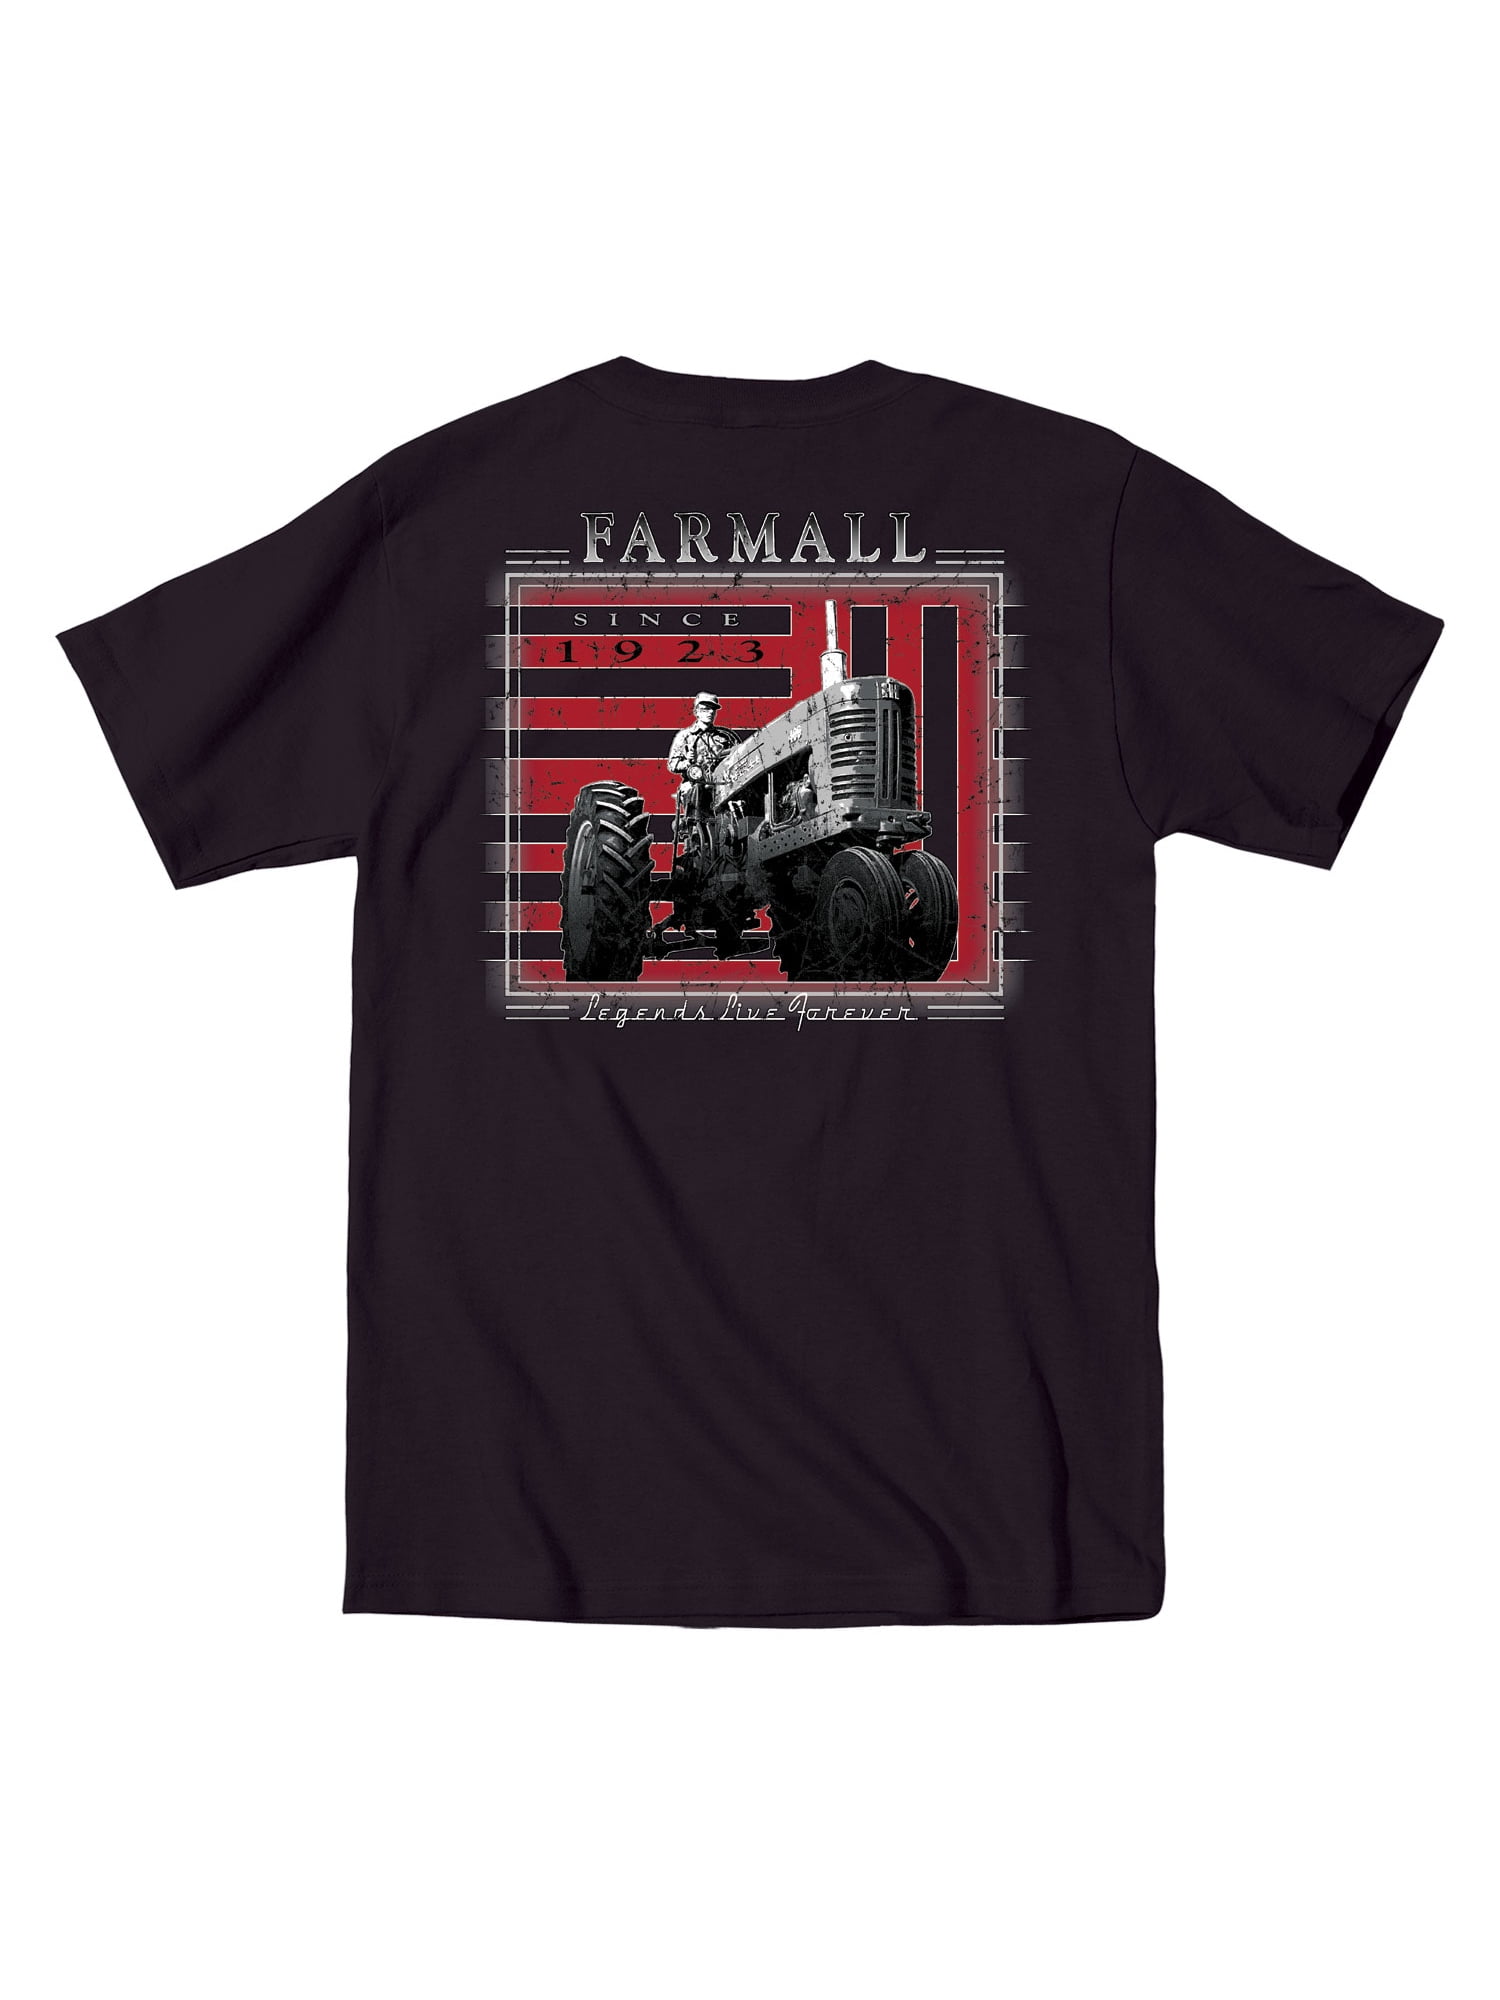 Case IH Legends Live Forever McCormick Farmall Vintage Country Tractor Farm Men s Short Sleeve Graphic T Shirt 83865e4e c29f 4293 932c 90e740c170ad.290e36696d94c9c08005ef6f453359d2